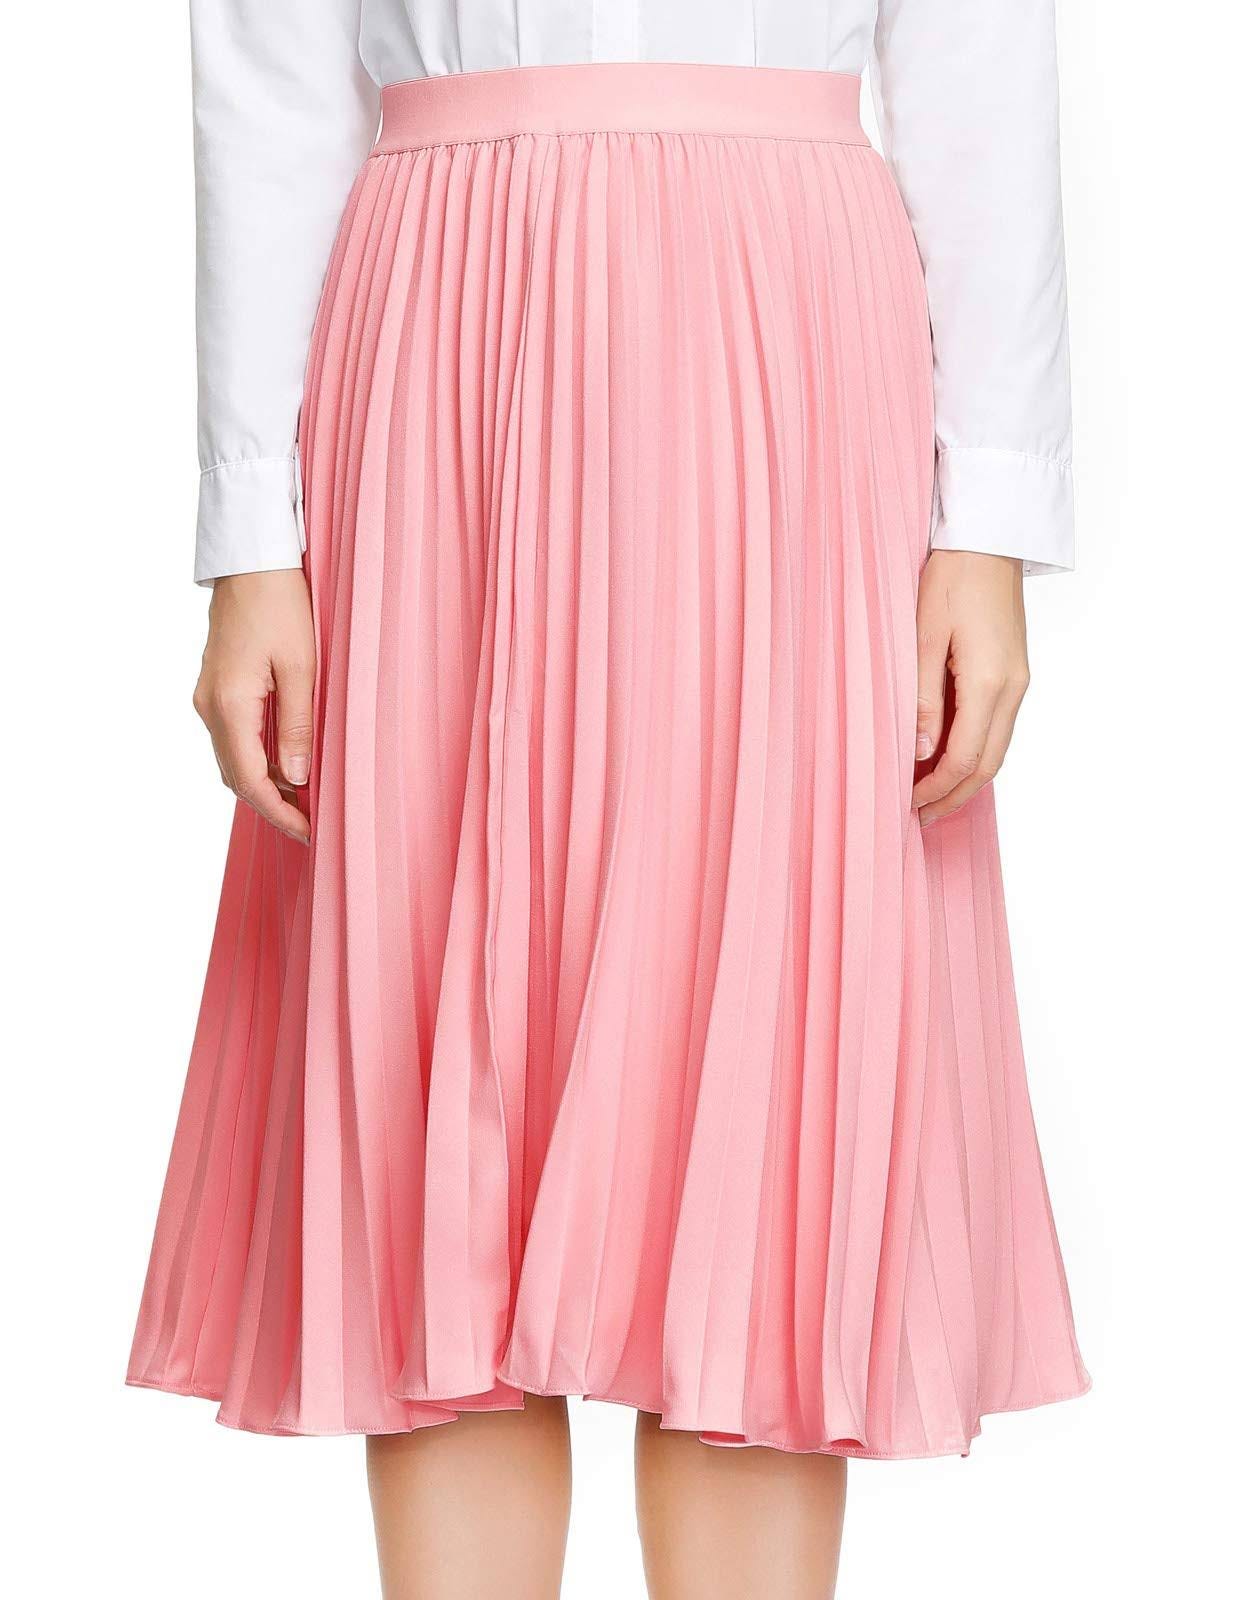 Stylish High Waist Pleated Midi Skirt for Women in Pink | Image